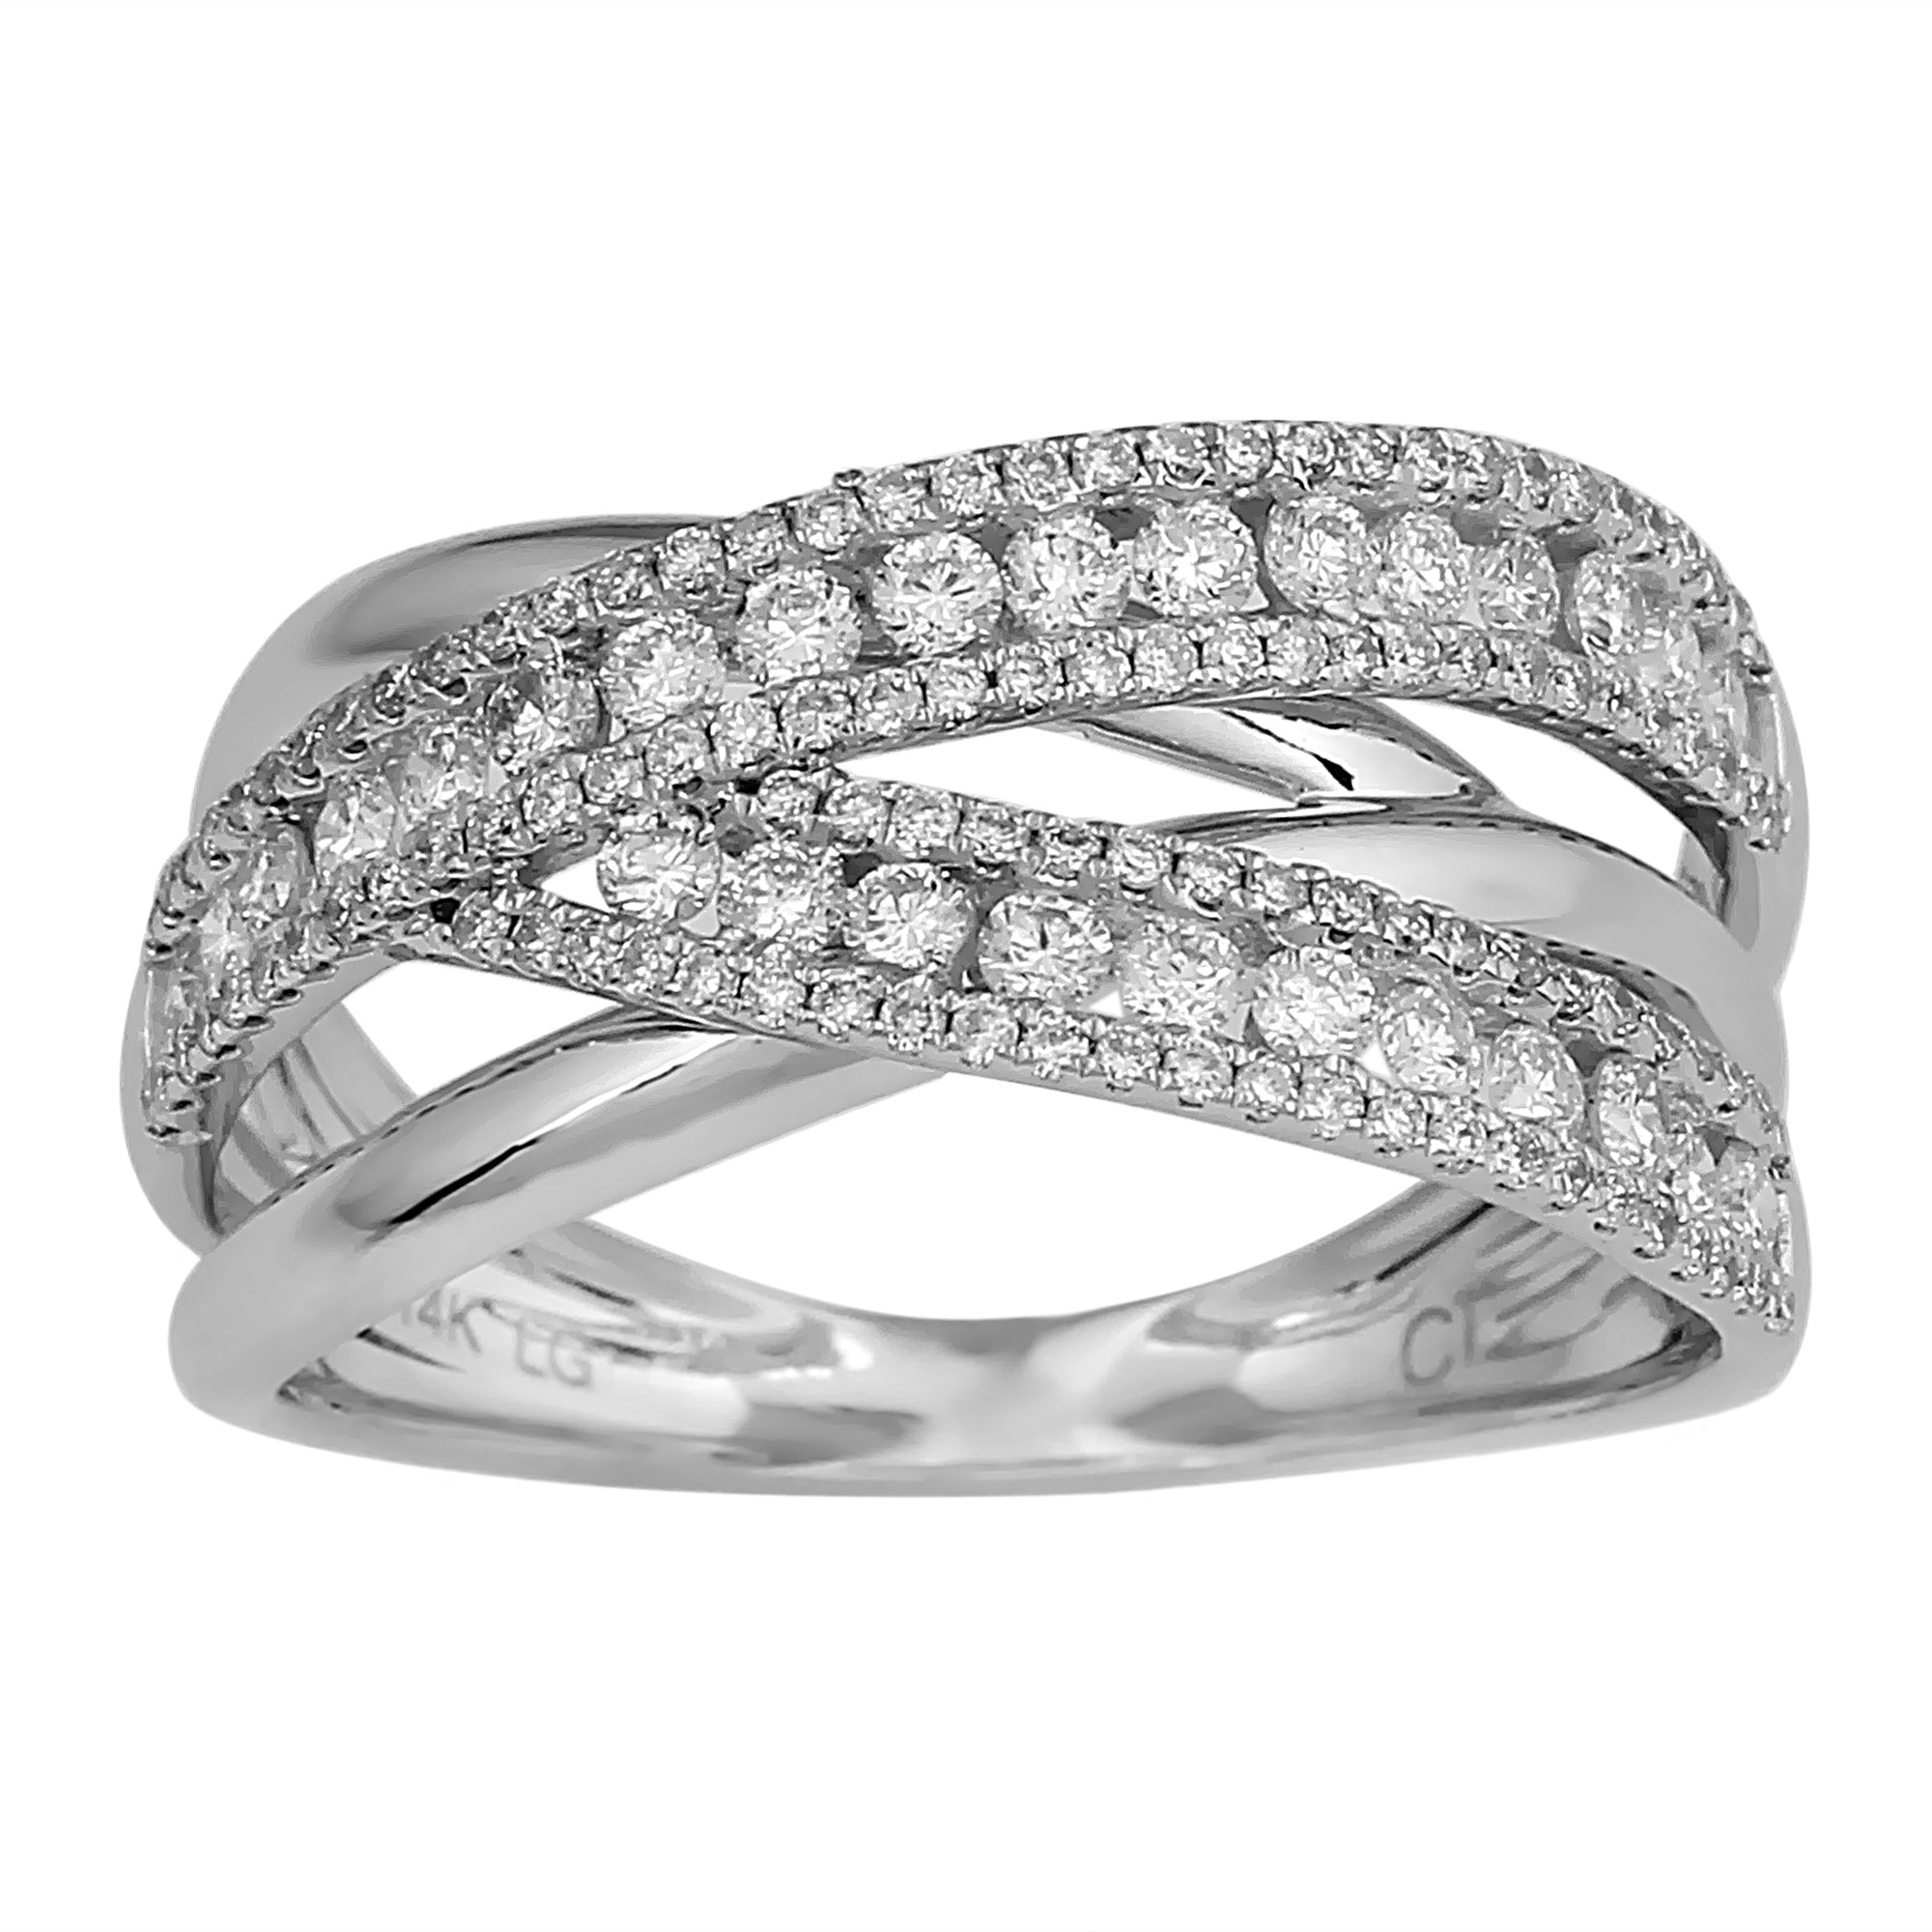 0.85CTTW Lab-Created Diamond Multi-Row Crossover Ring in 14K White Gol ...